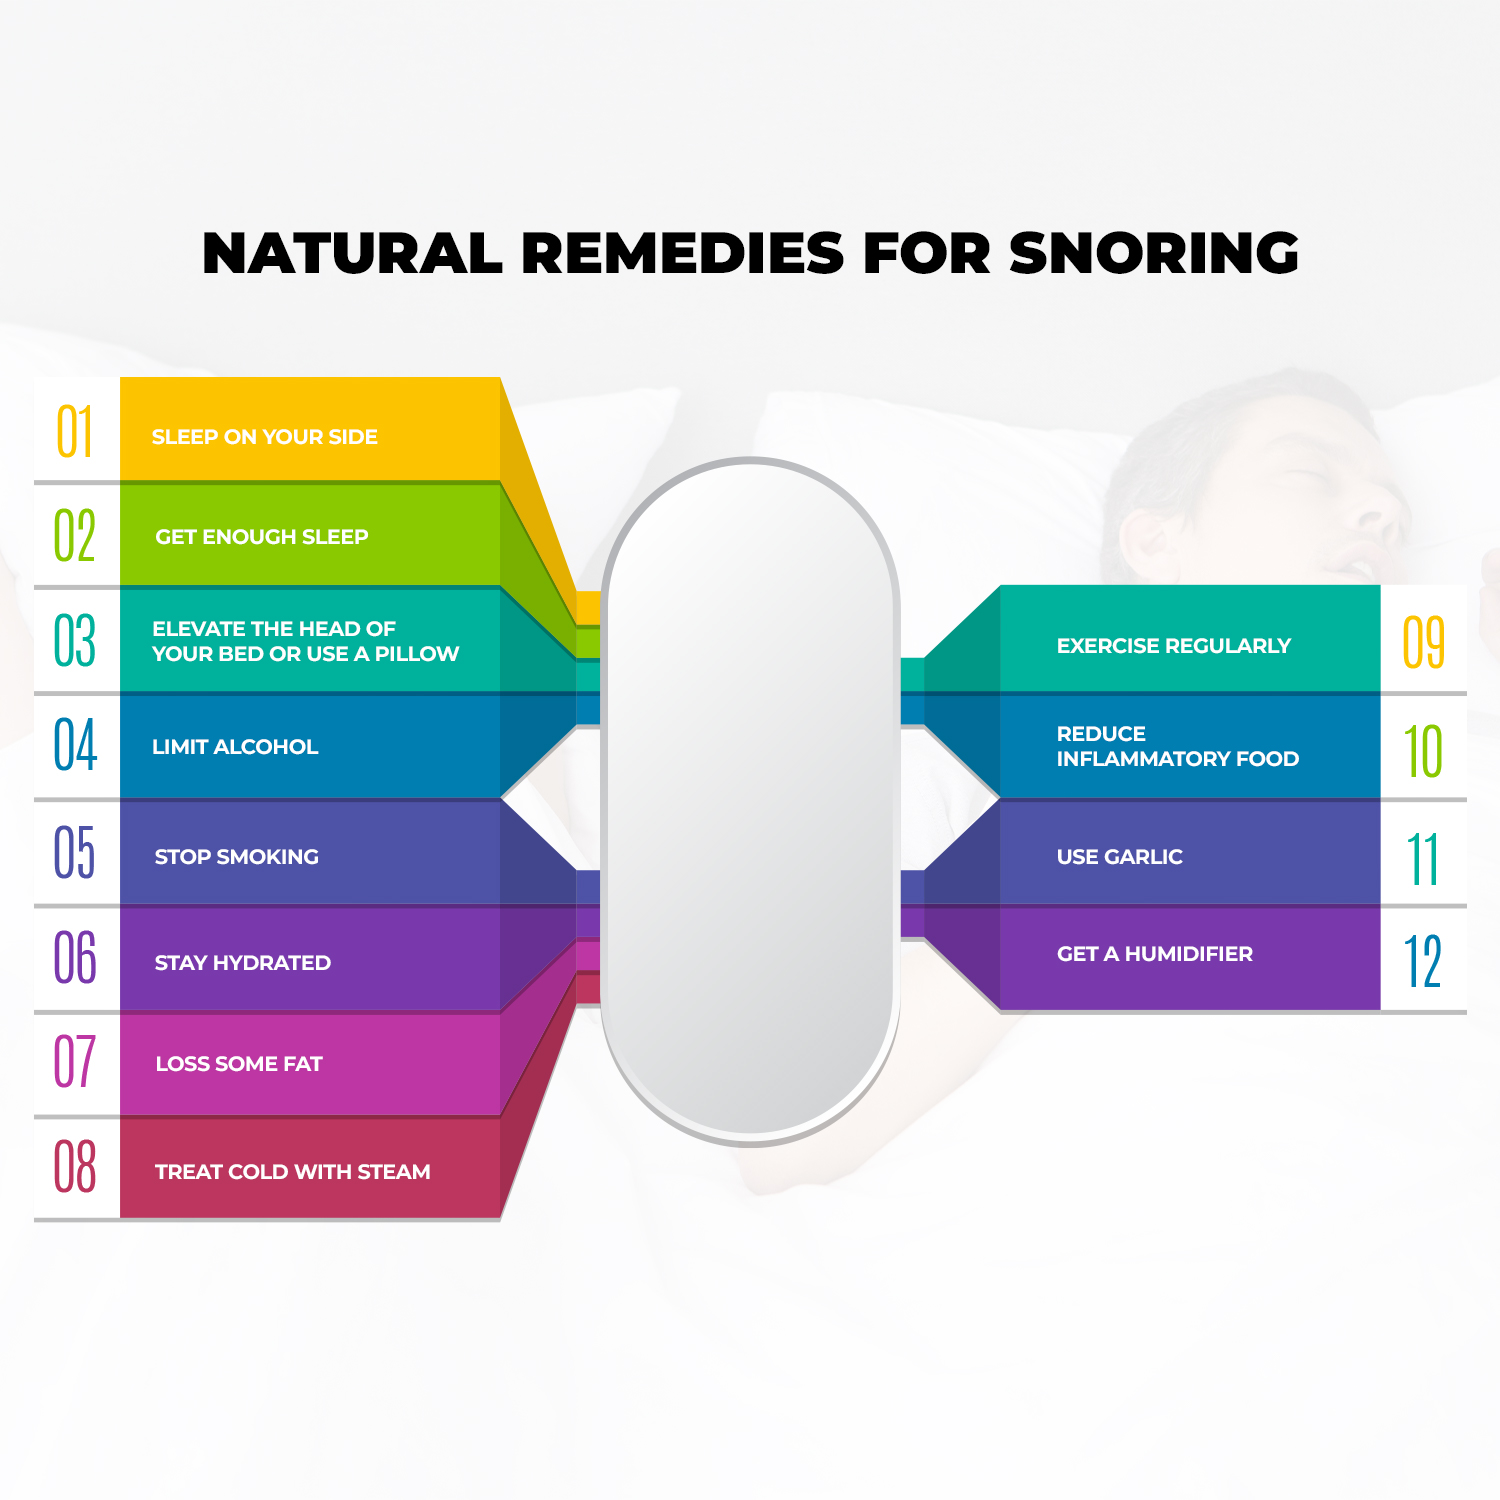 12 Best Natural Remedies For Snoring